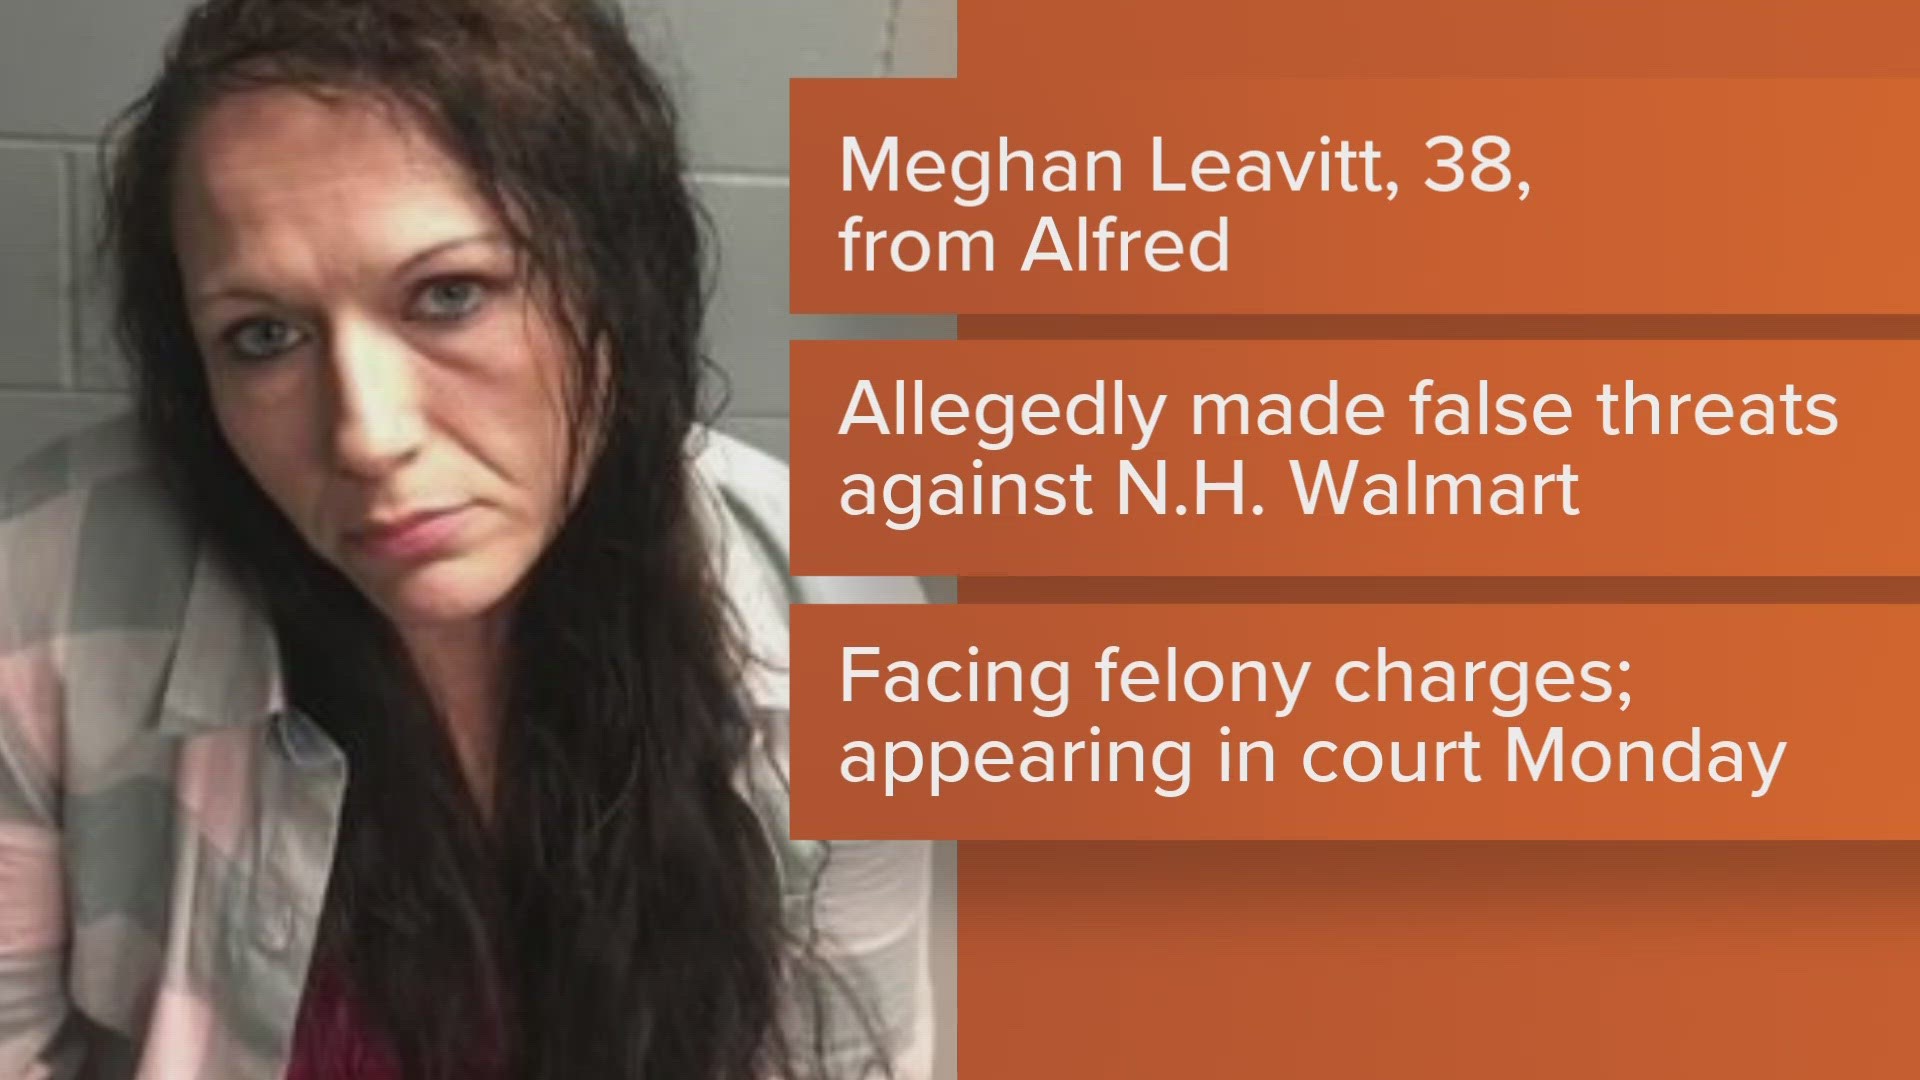 Meghan Leavitt, of Alfred, is scheduled to appear in New Hampshire court on Monday, March 20.